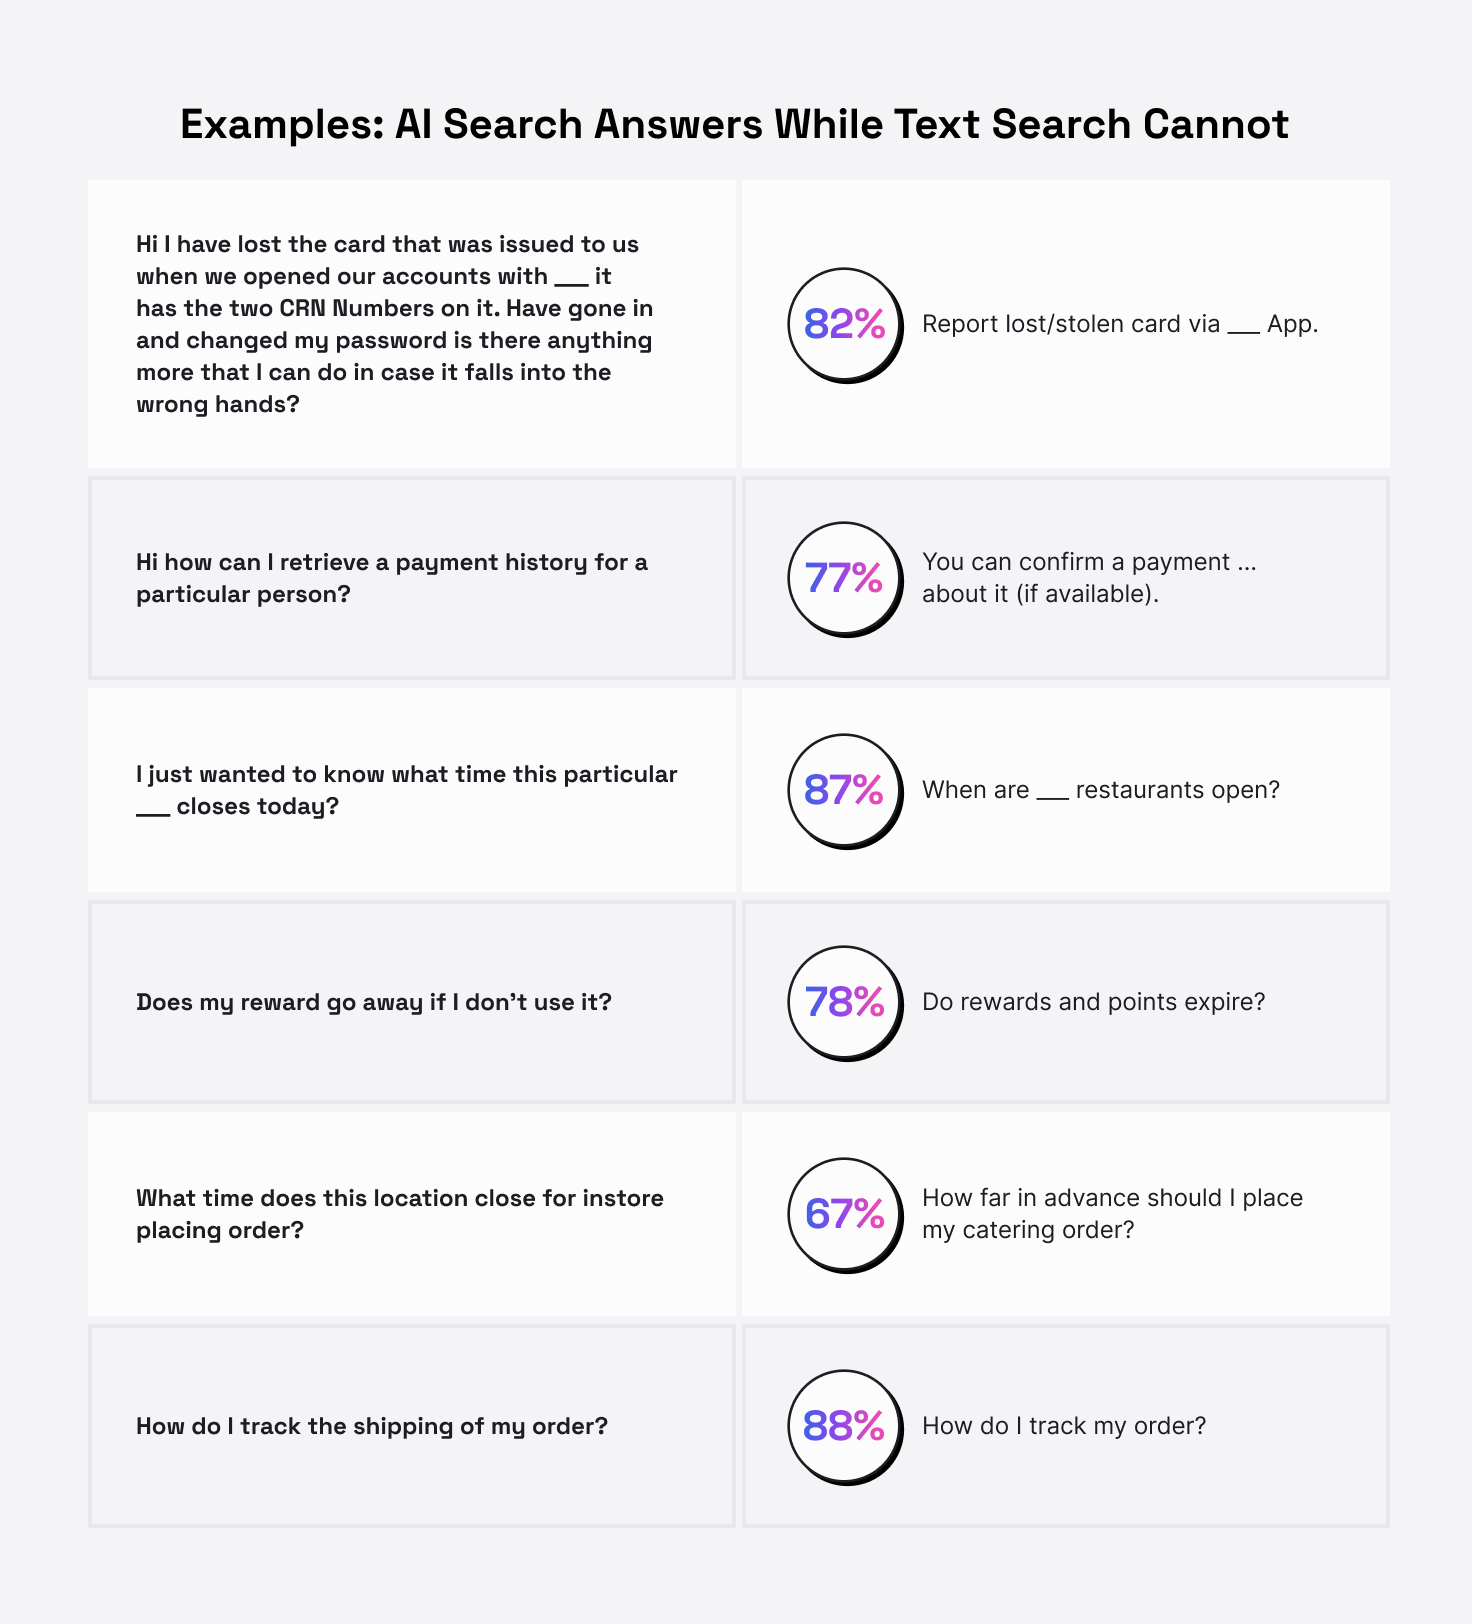 Comparing the knowledge base articles recommended by the AI-powered search's natural language processing vs. Text Search